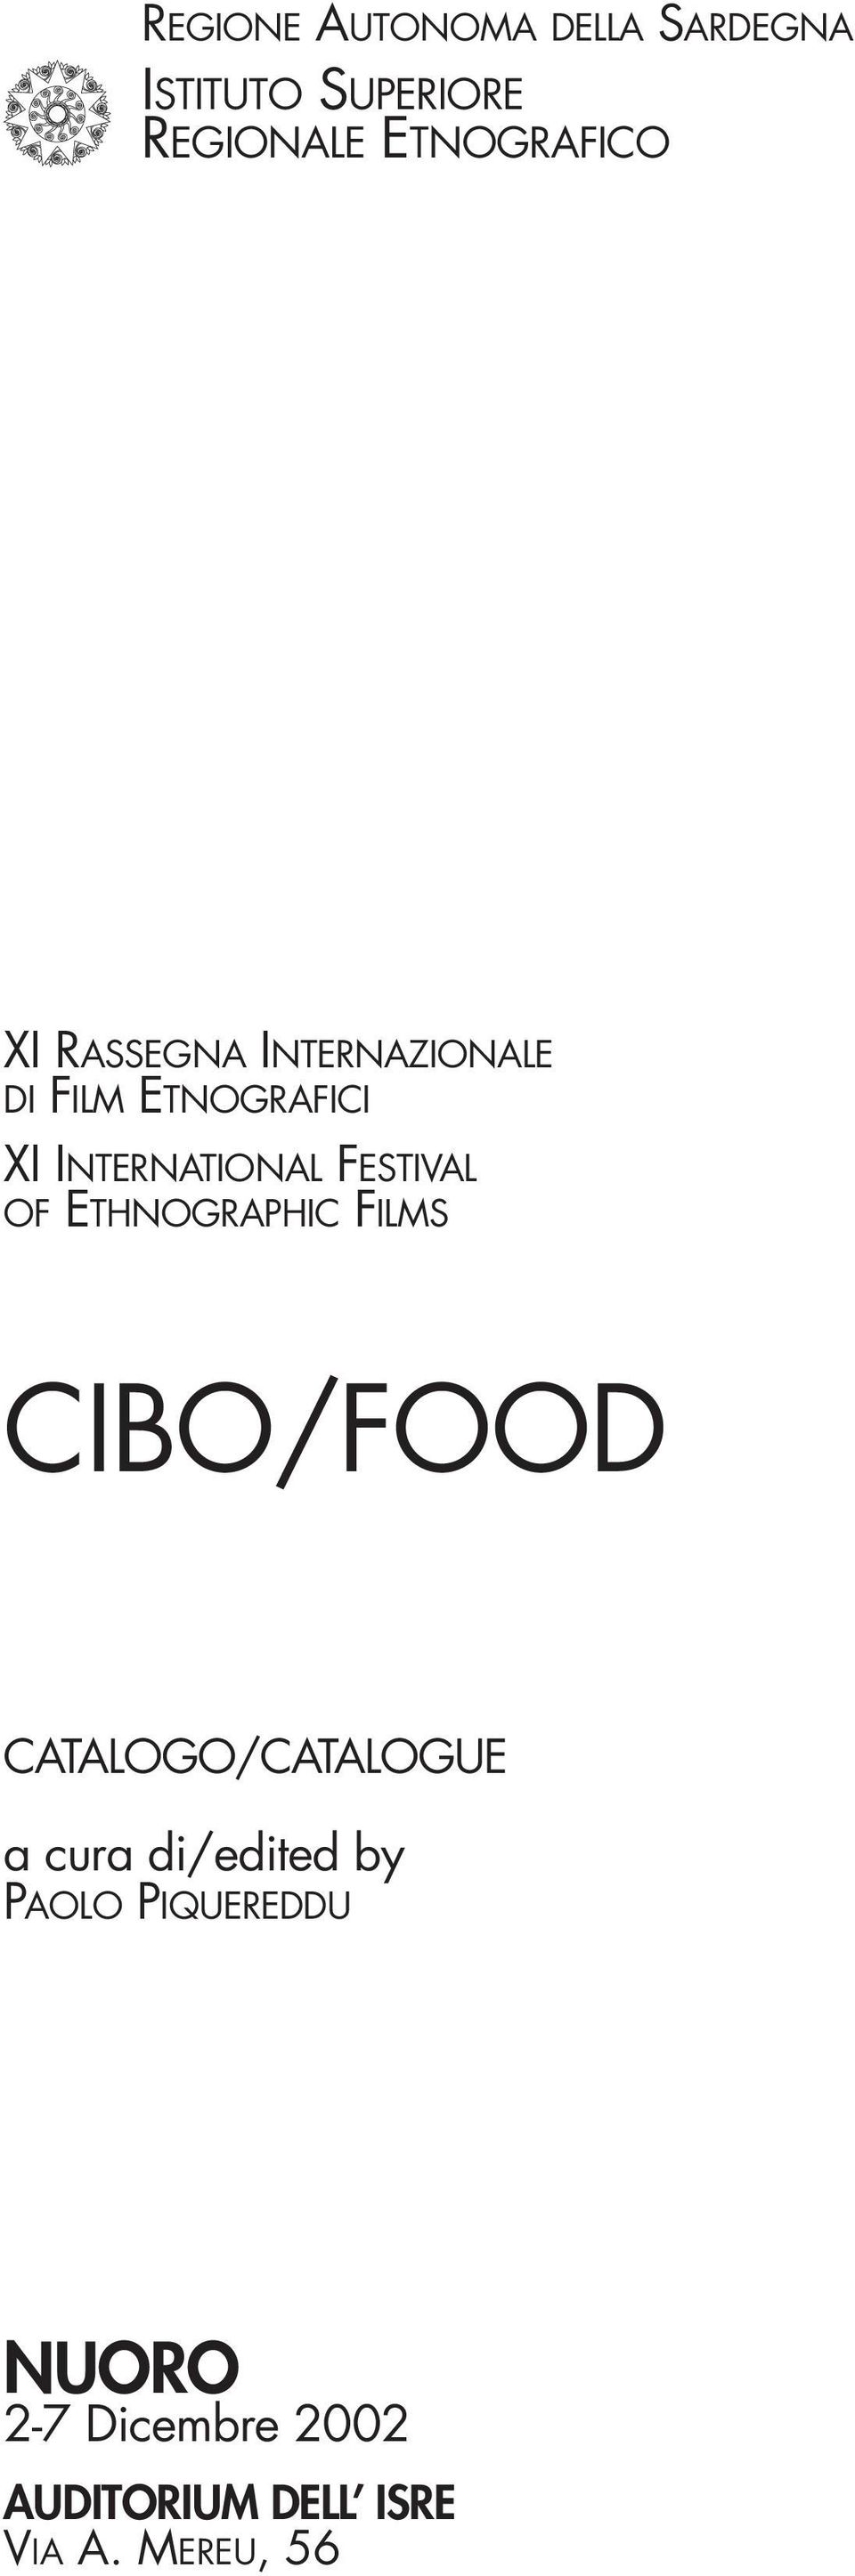 OF ETHNOGRAPHIC FILMS CIBO/FOOD CATALOGO/CATALOGUE a cura di/edited by